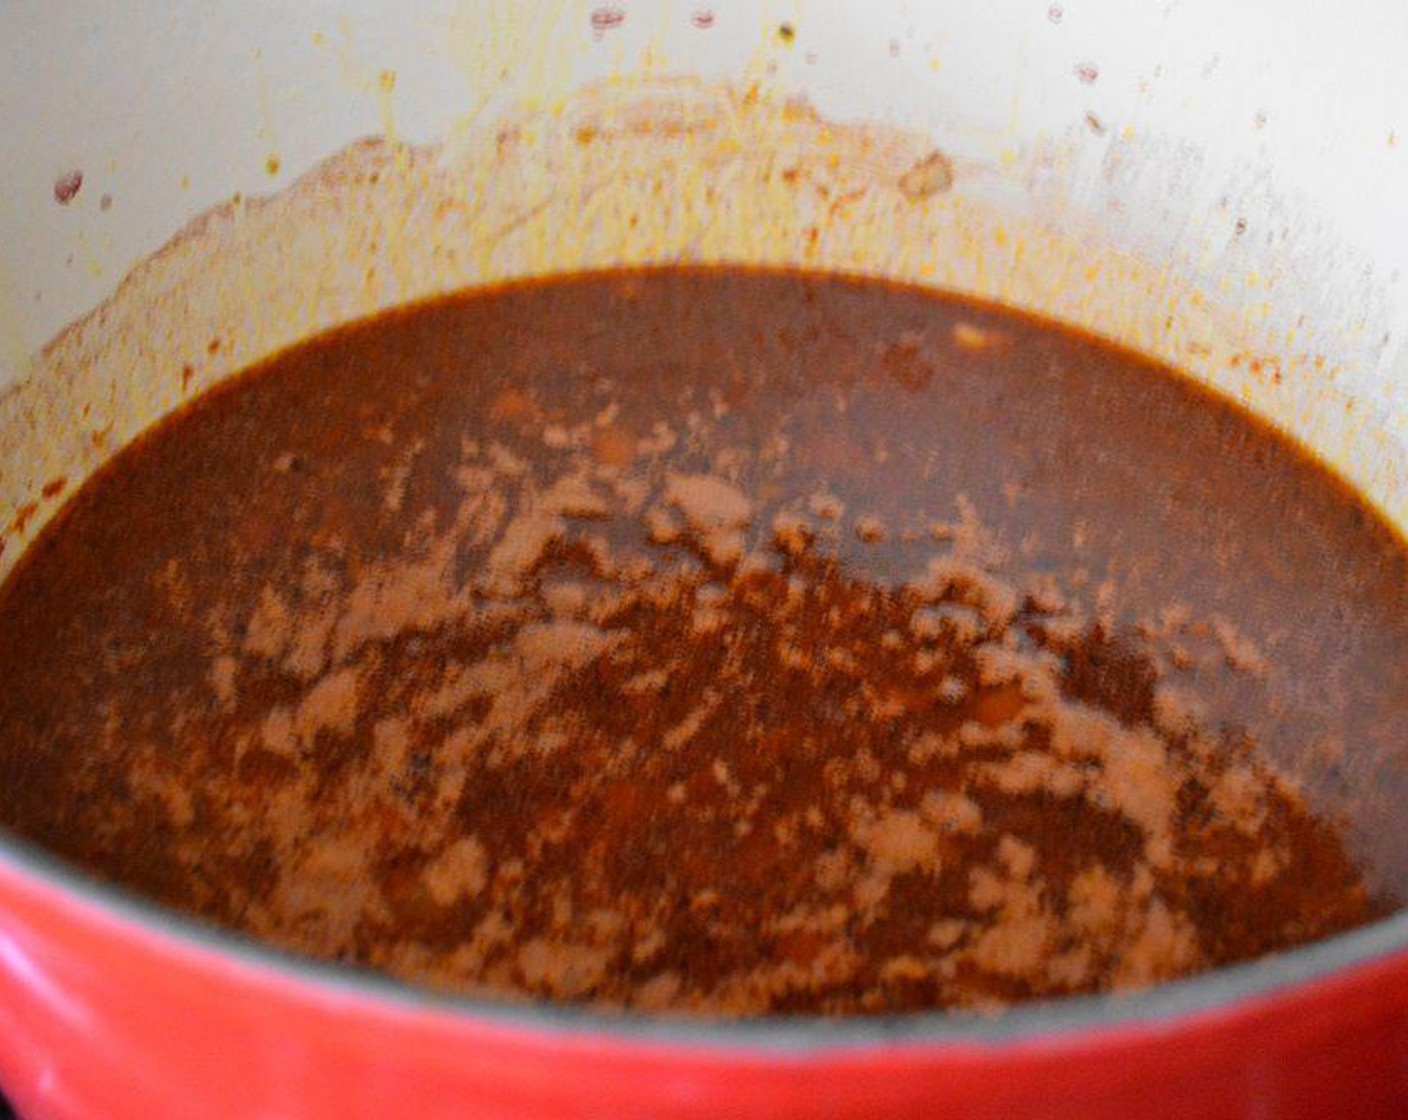 step 2 Once it is completely cooked add in the Garlic (3 cloves), Onion (1), and Tomato Paste (2 Tbsp). Let them cook and get fragrant for just a minute while you stir them in. Lastly, pour in that lovely bottle of Dry Red Wine (3 cups). Let the sauce gently boil for 10 minutes.